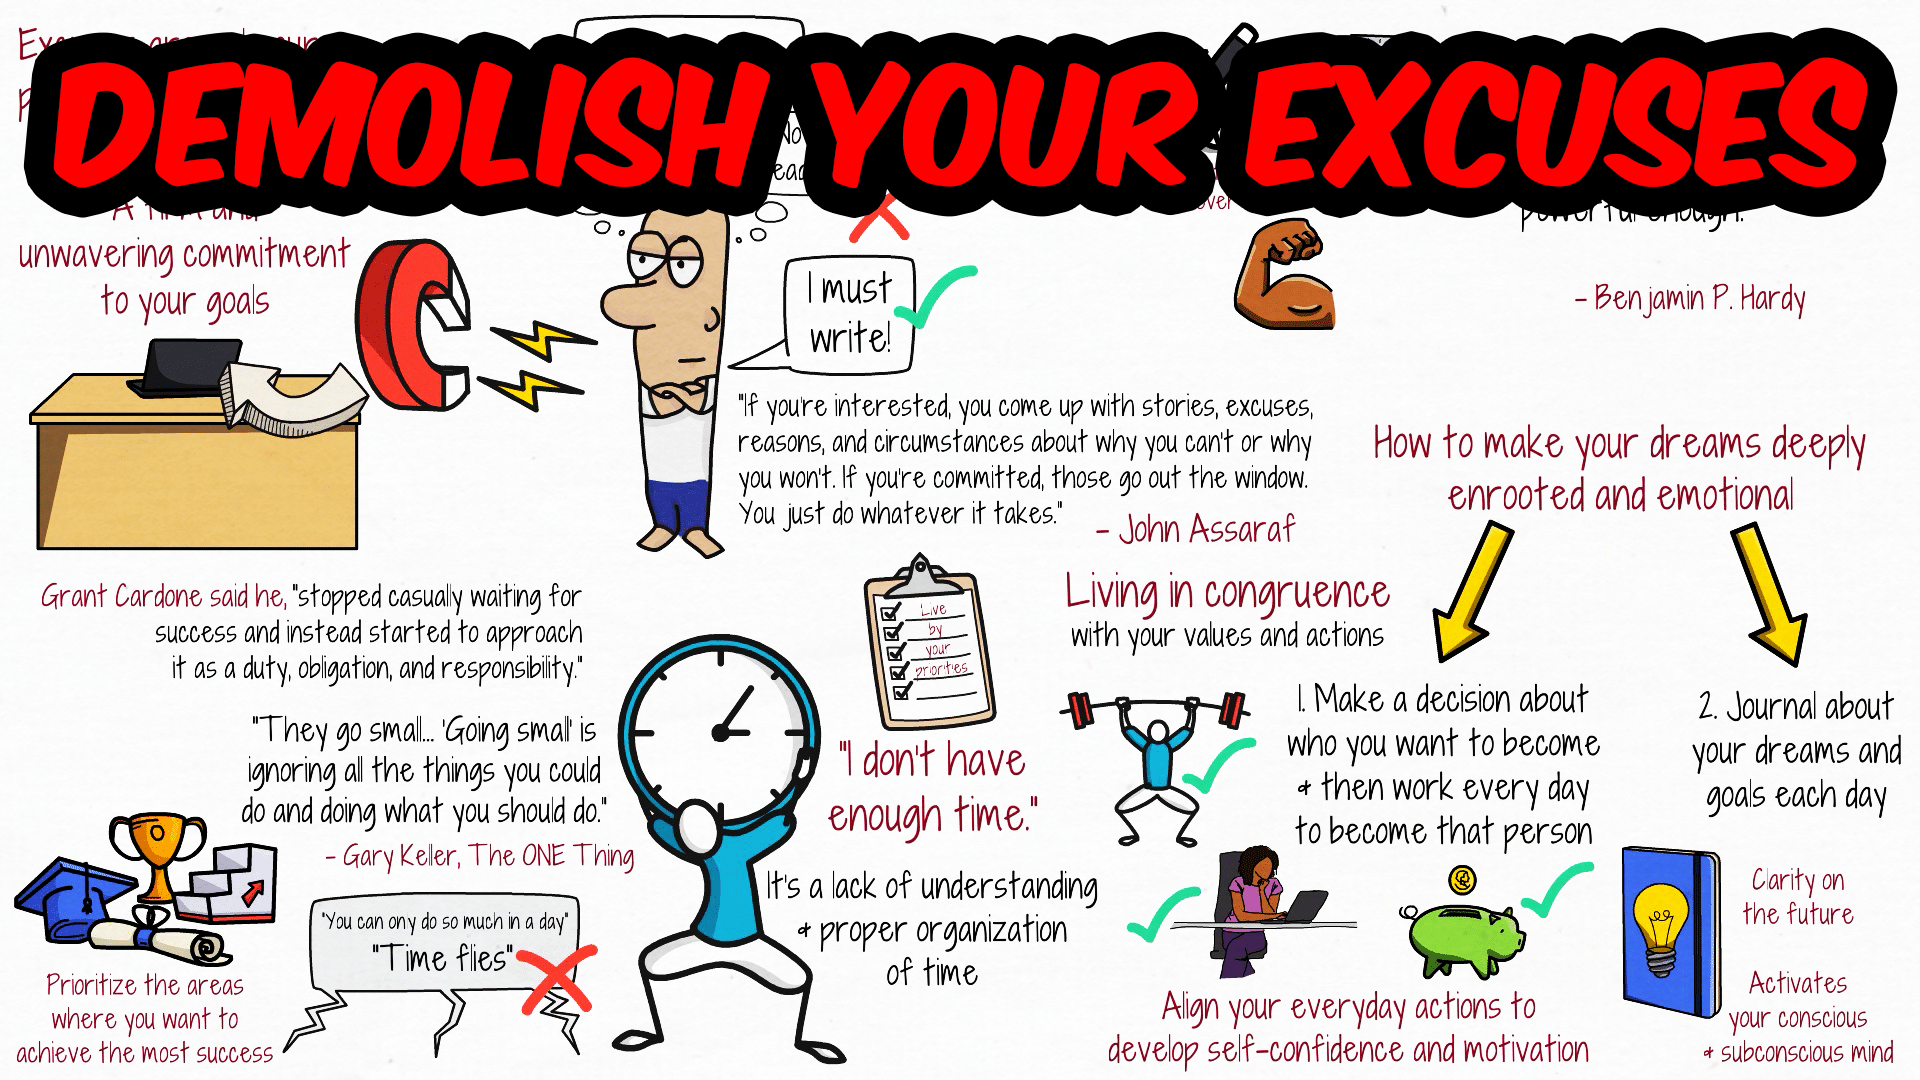 How to Become Obsessed with Your Goals and Demolish All Your Excuses